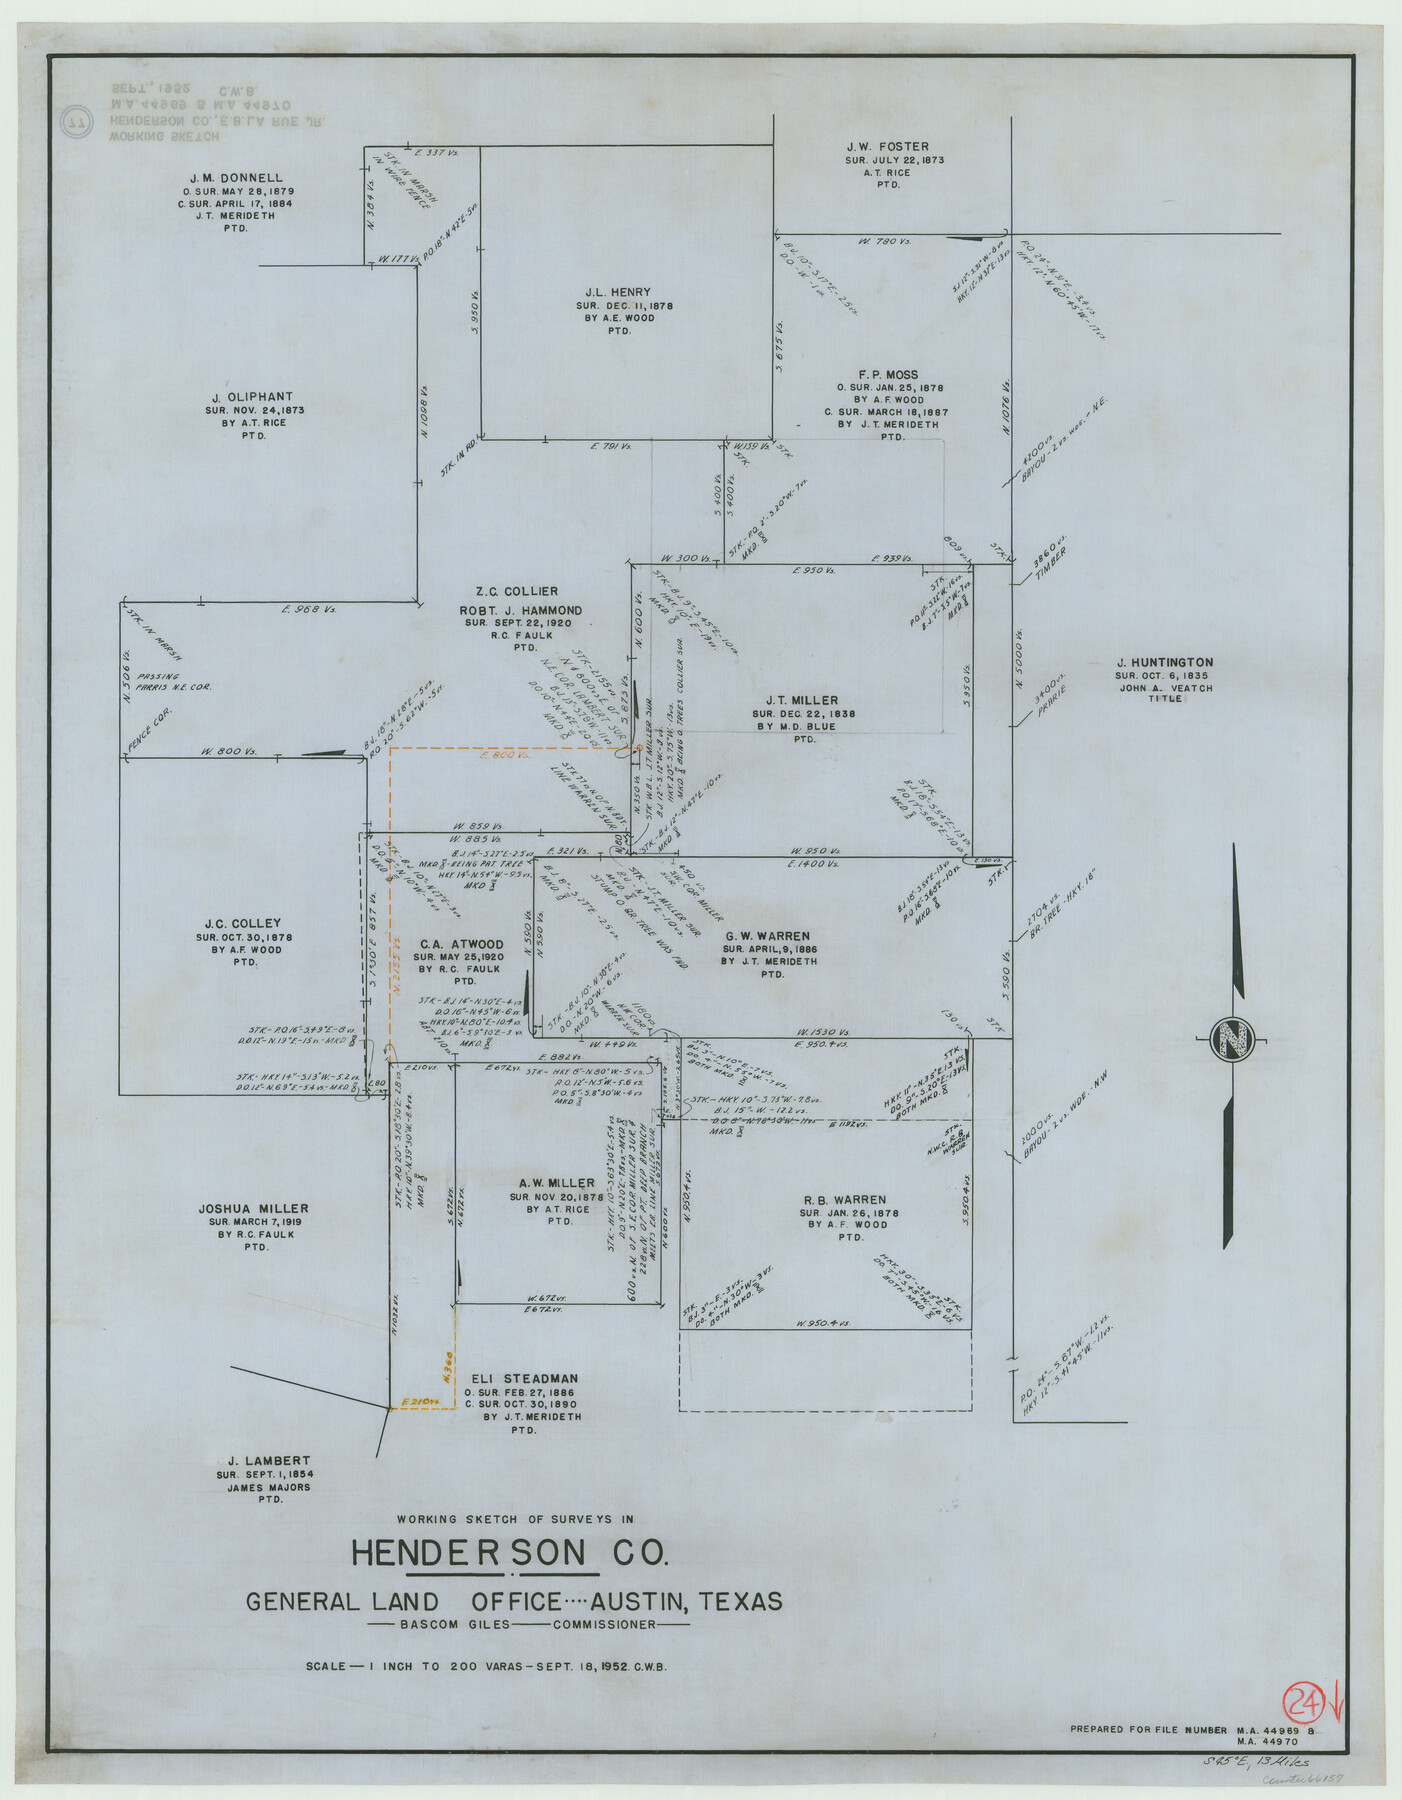 66157, Henderson County Working Sketch 24, General Map Collection